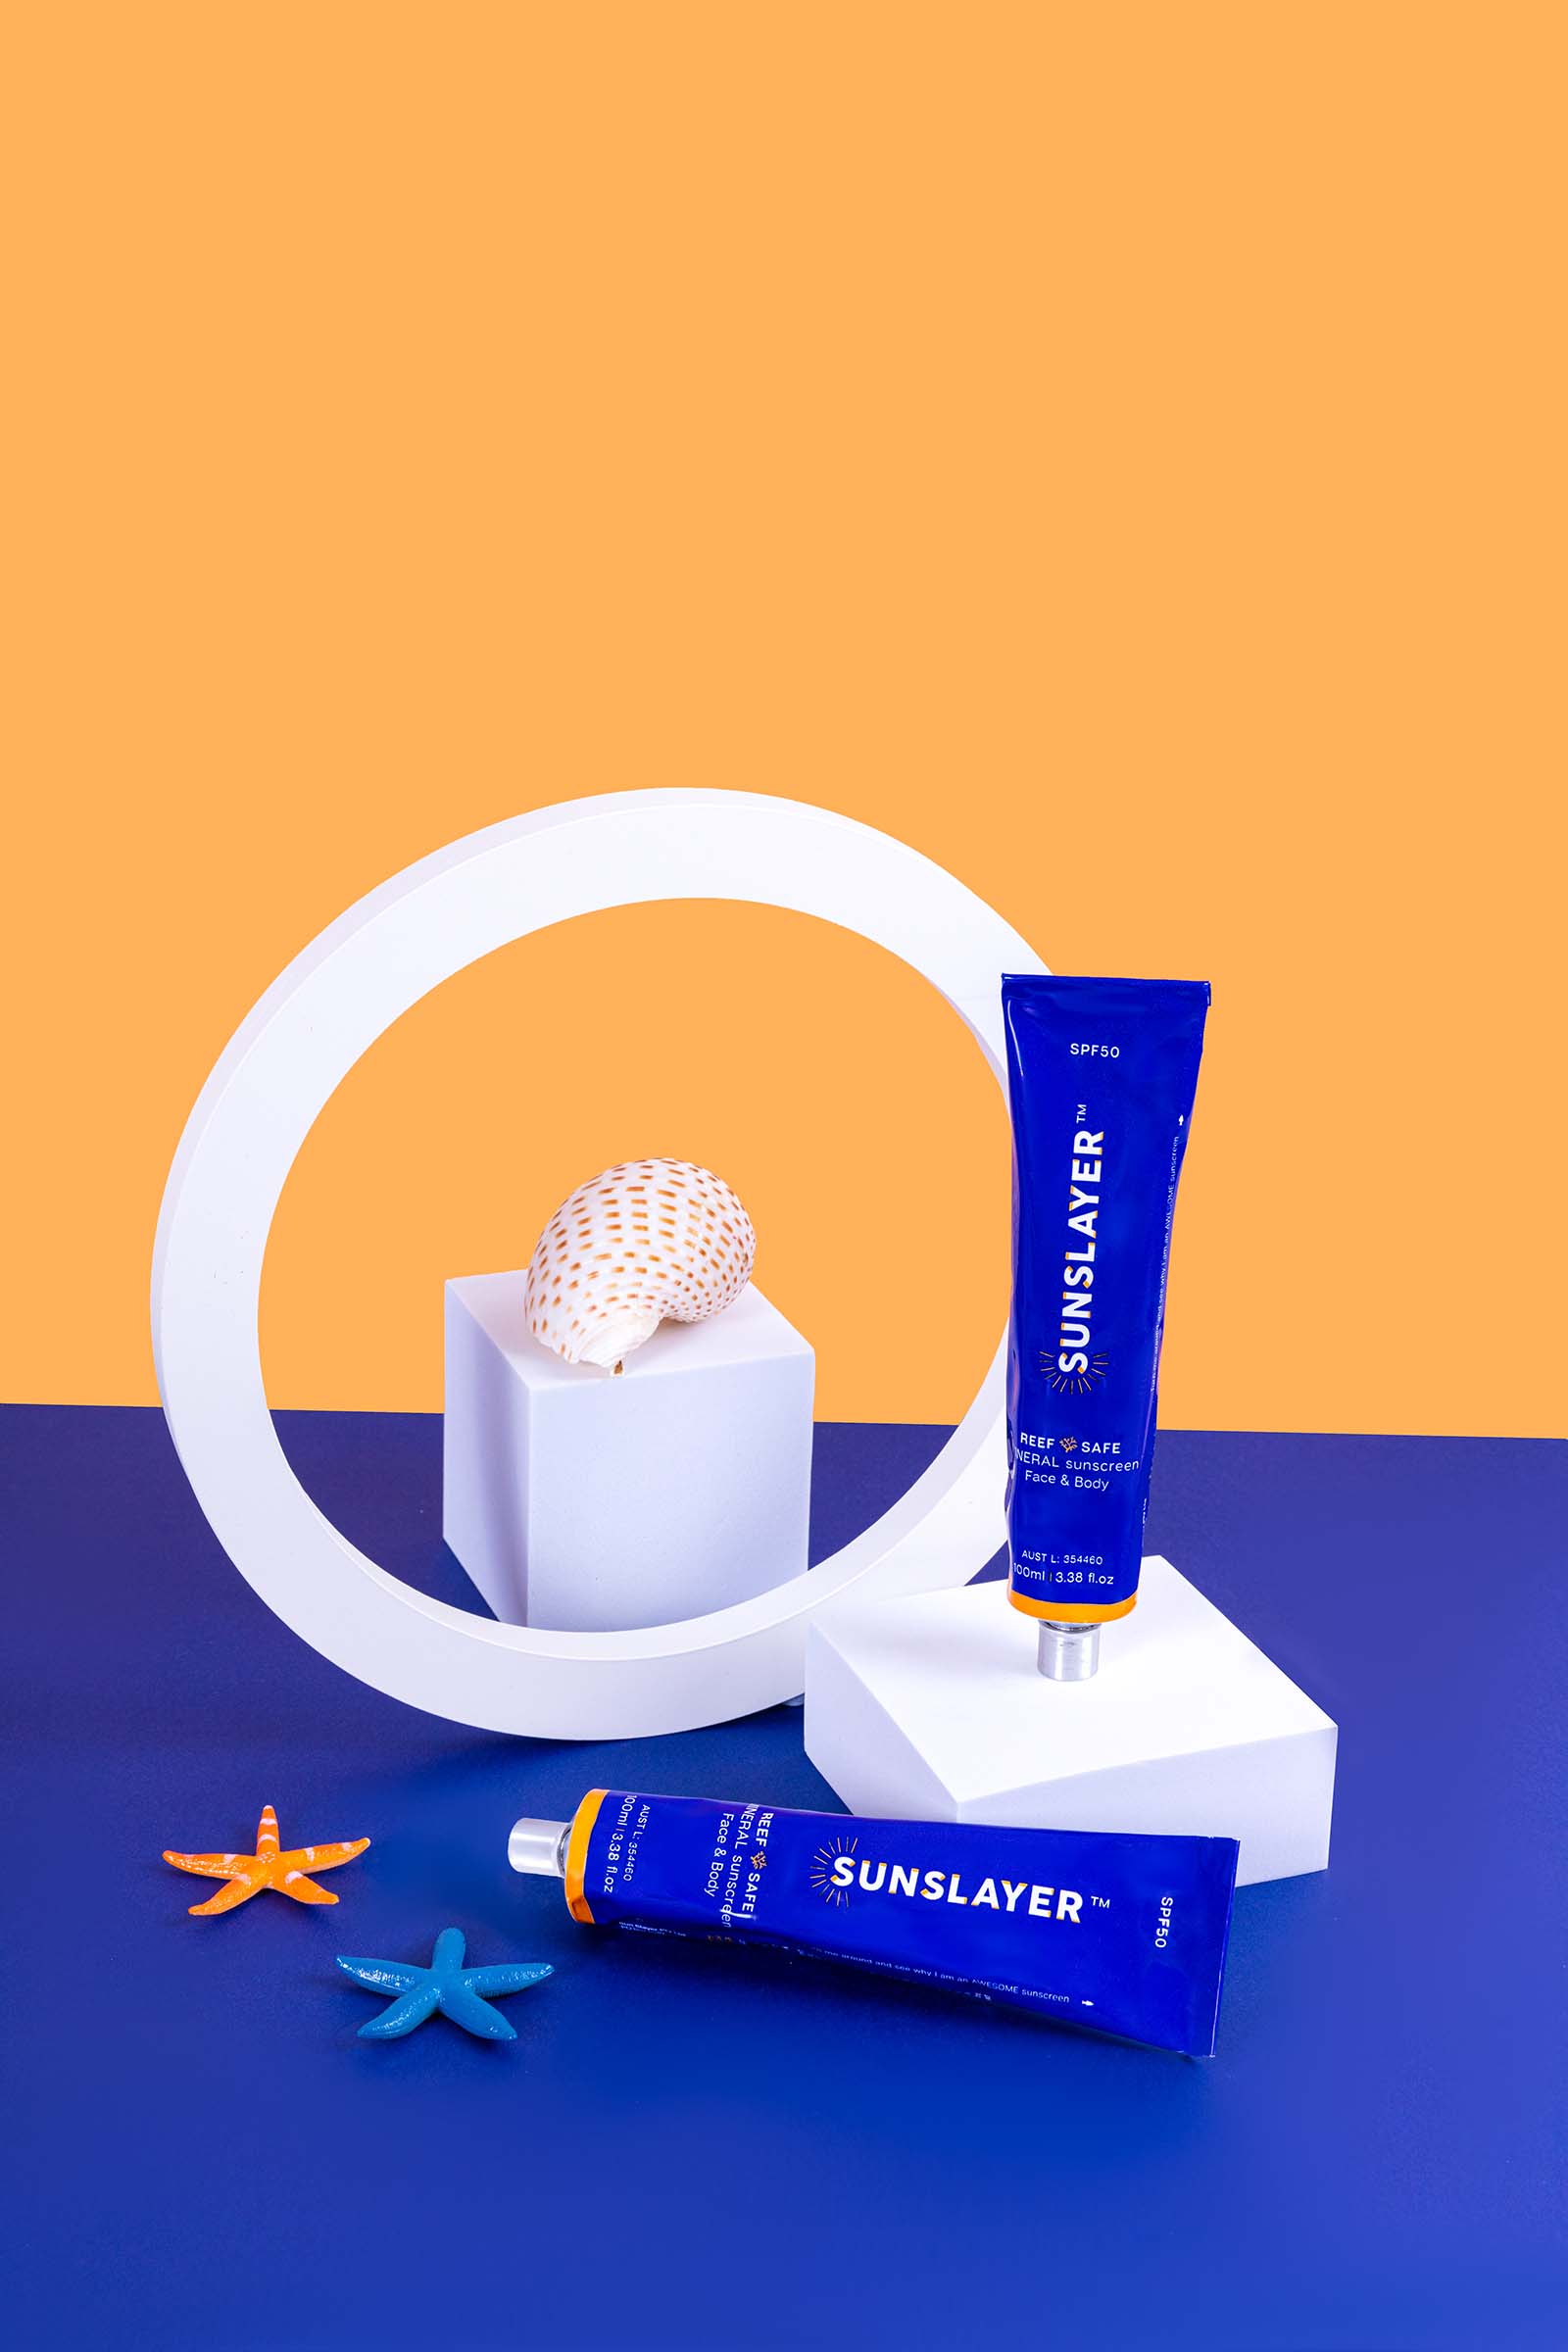 Bold Product Photos for a Sunscreen Brand. Orange and Blue product photography by Colourpop Studio